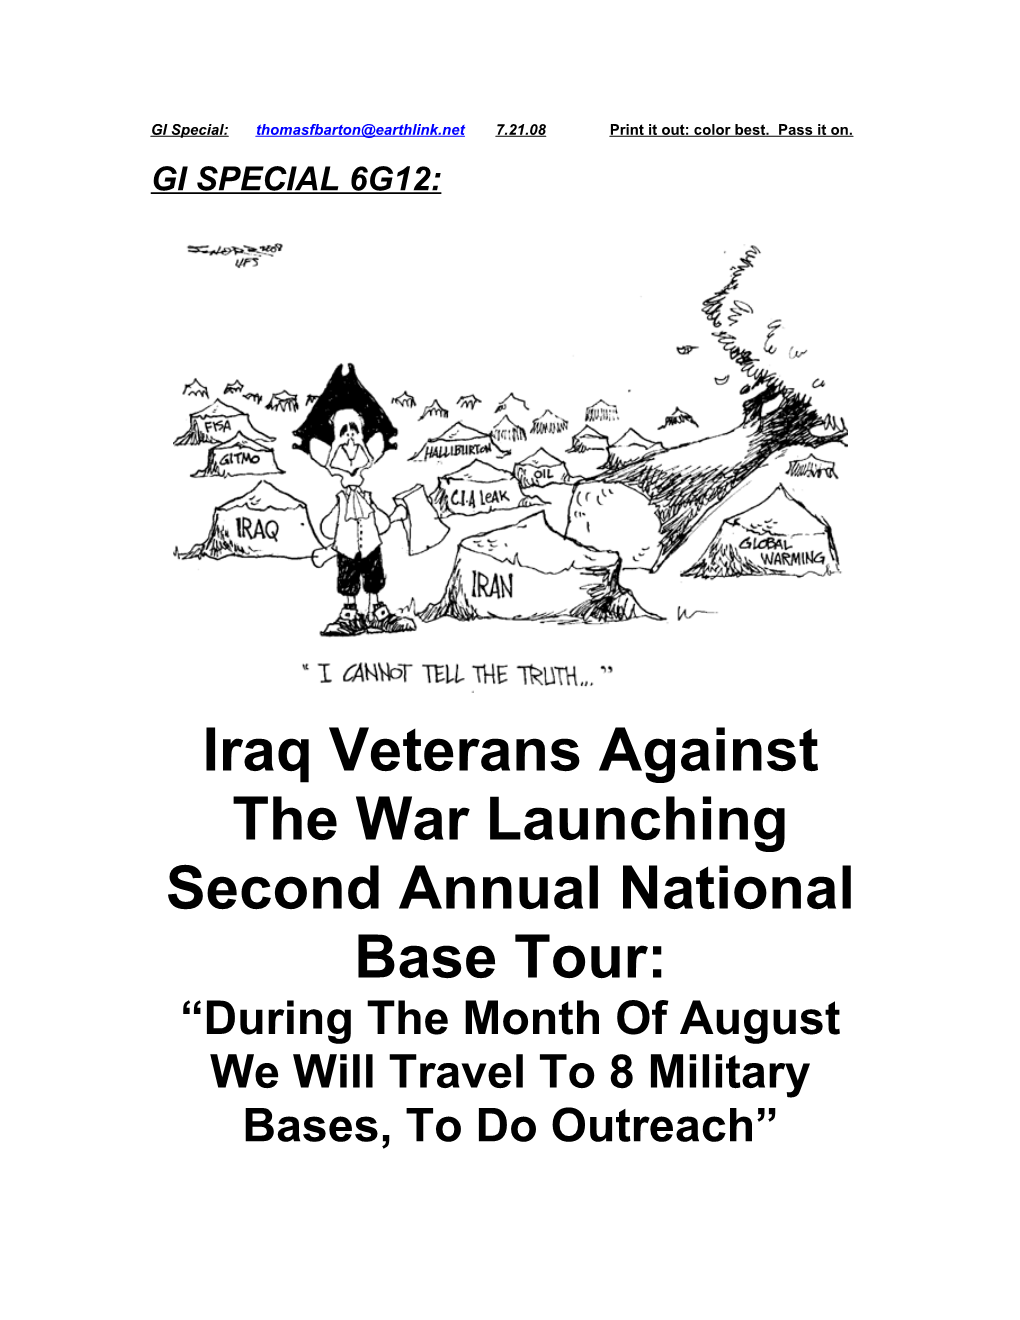 Iraq Veterans Against the War Launching Second Annual National Base Tour